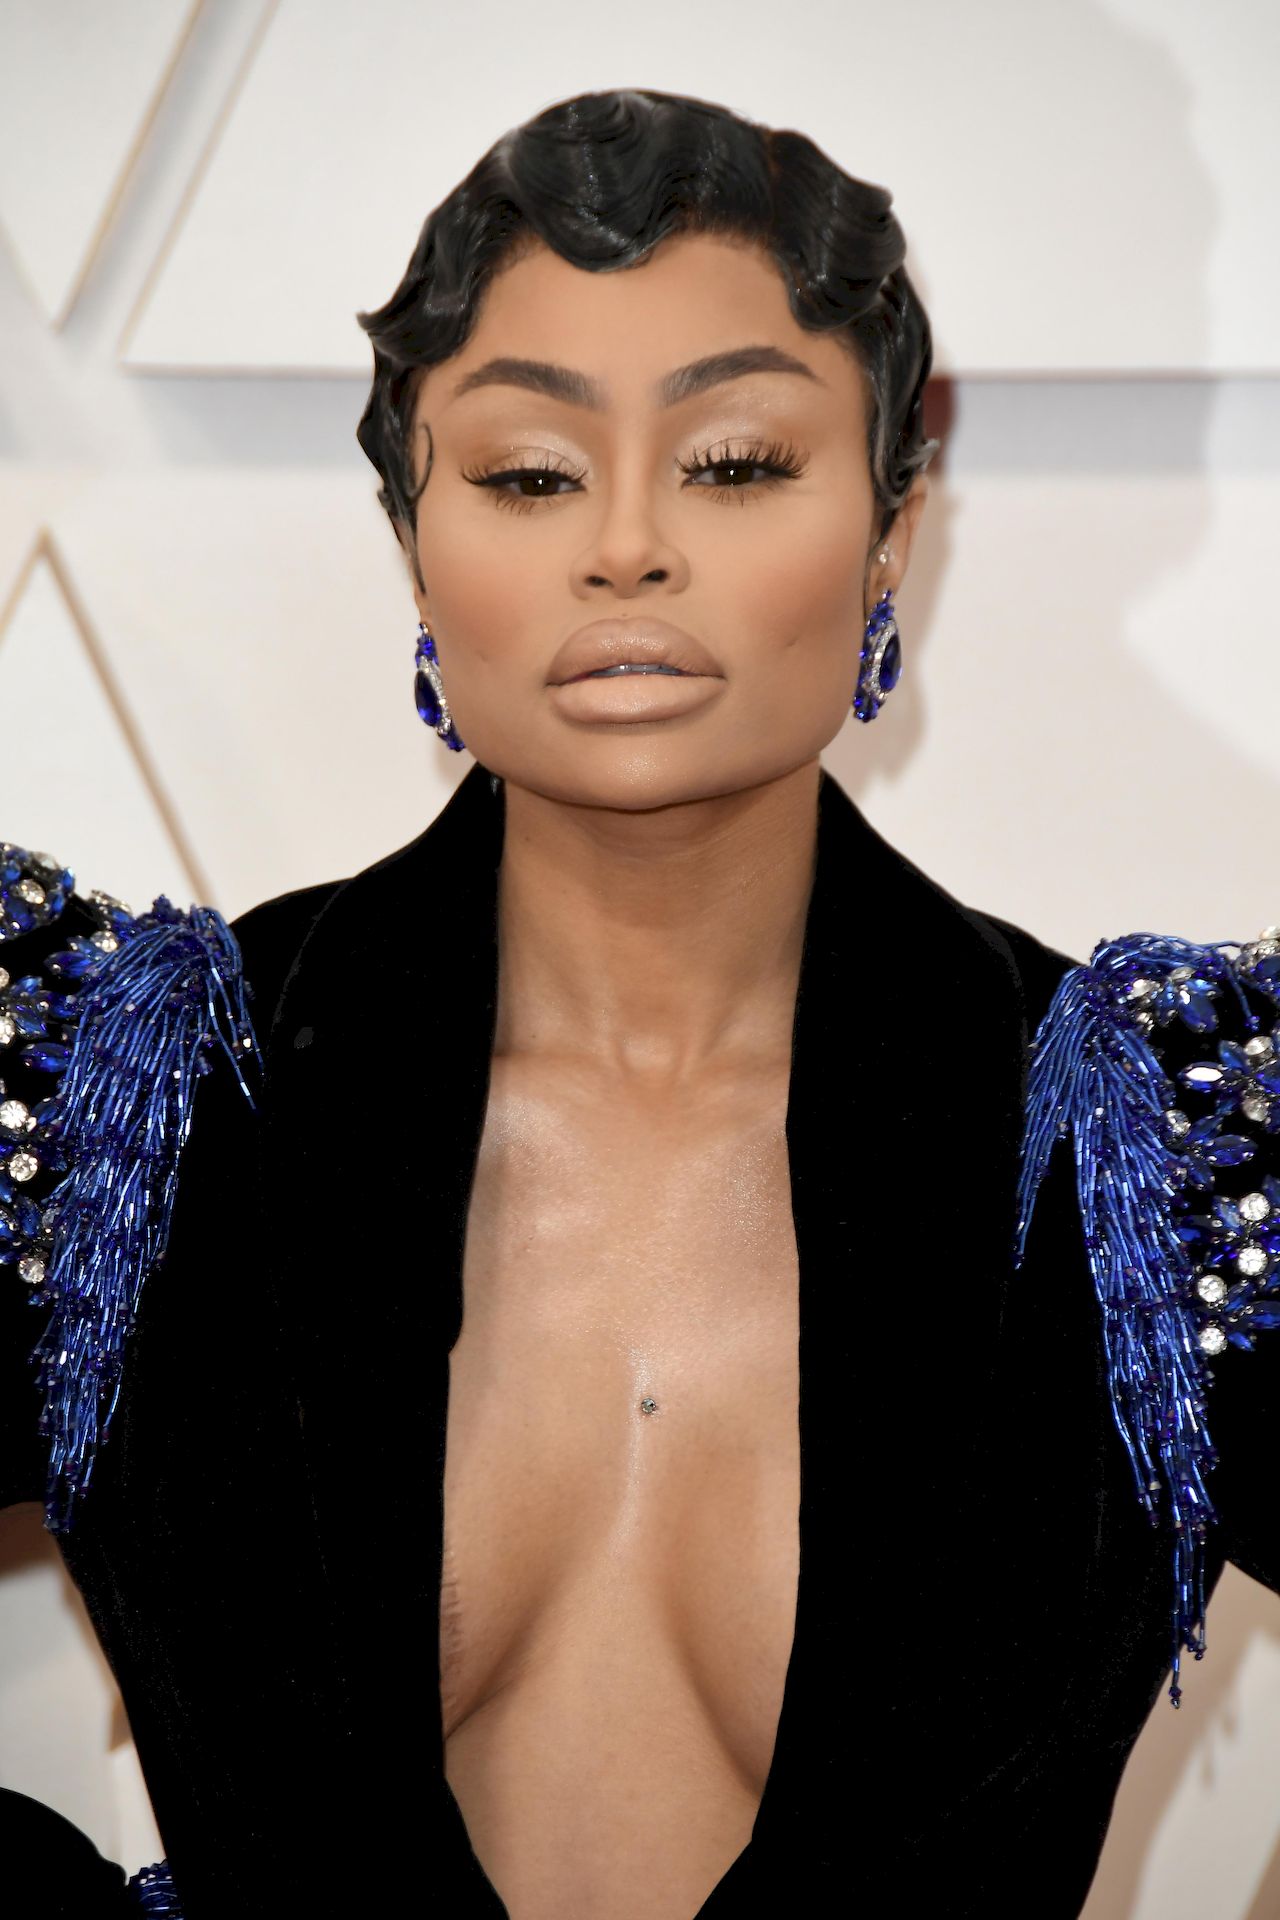 Blac Chyna Shows Her Cleavage At The 92nd Academy Awards 0006